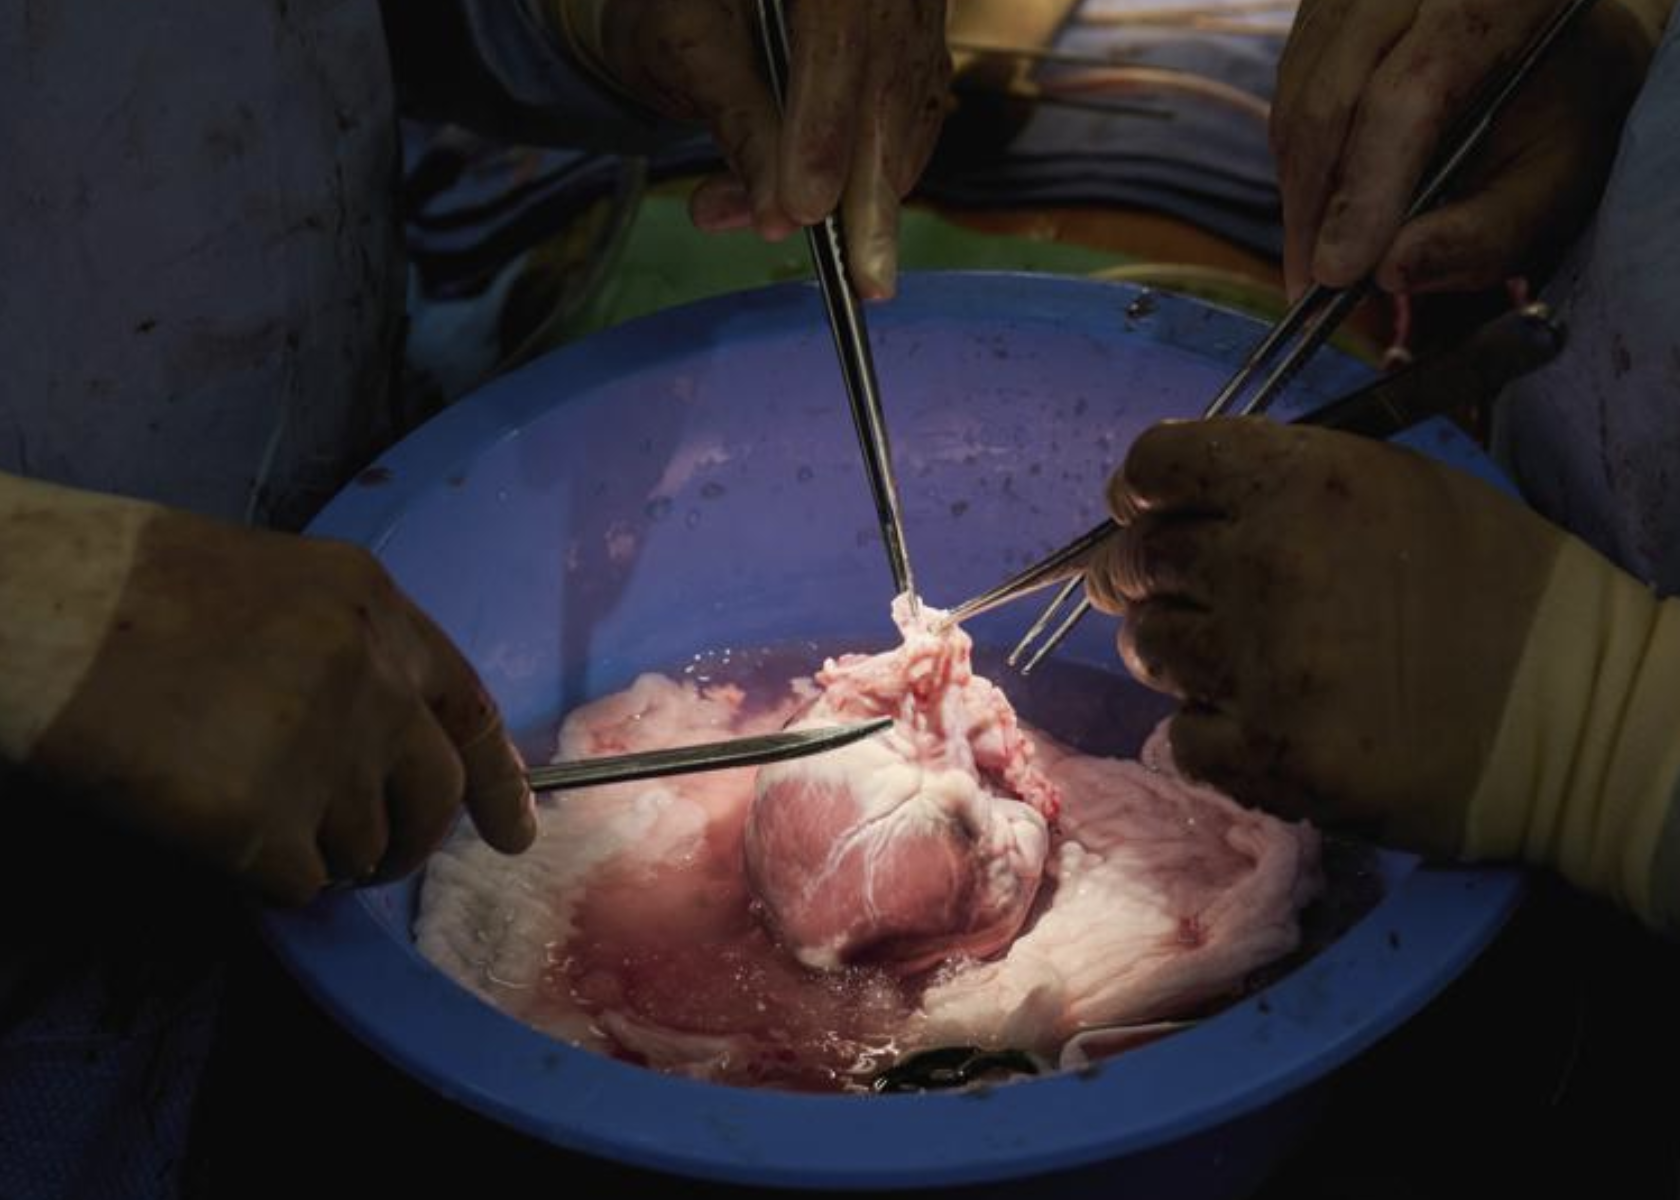 Surgeons prepare a genetically modified pig heart for transplant